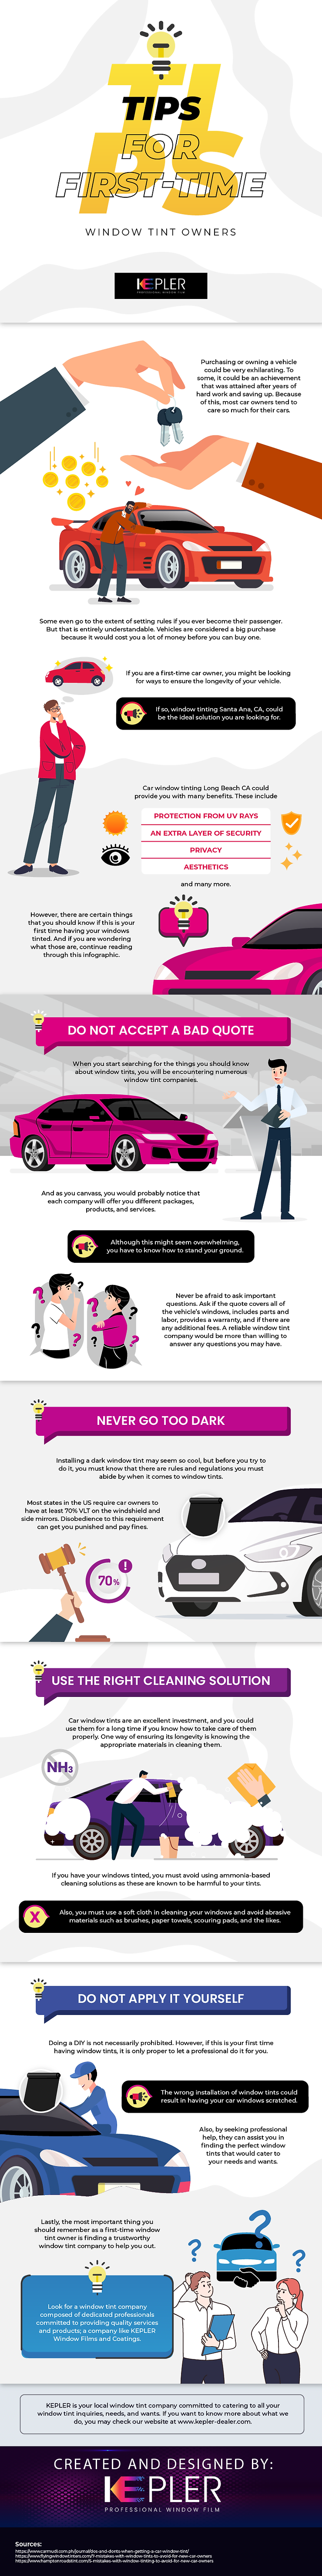 Tips For First Time Window Tint Owners  - Infographic